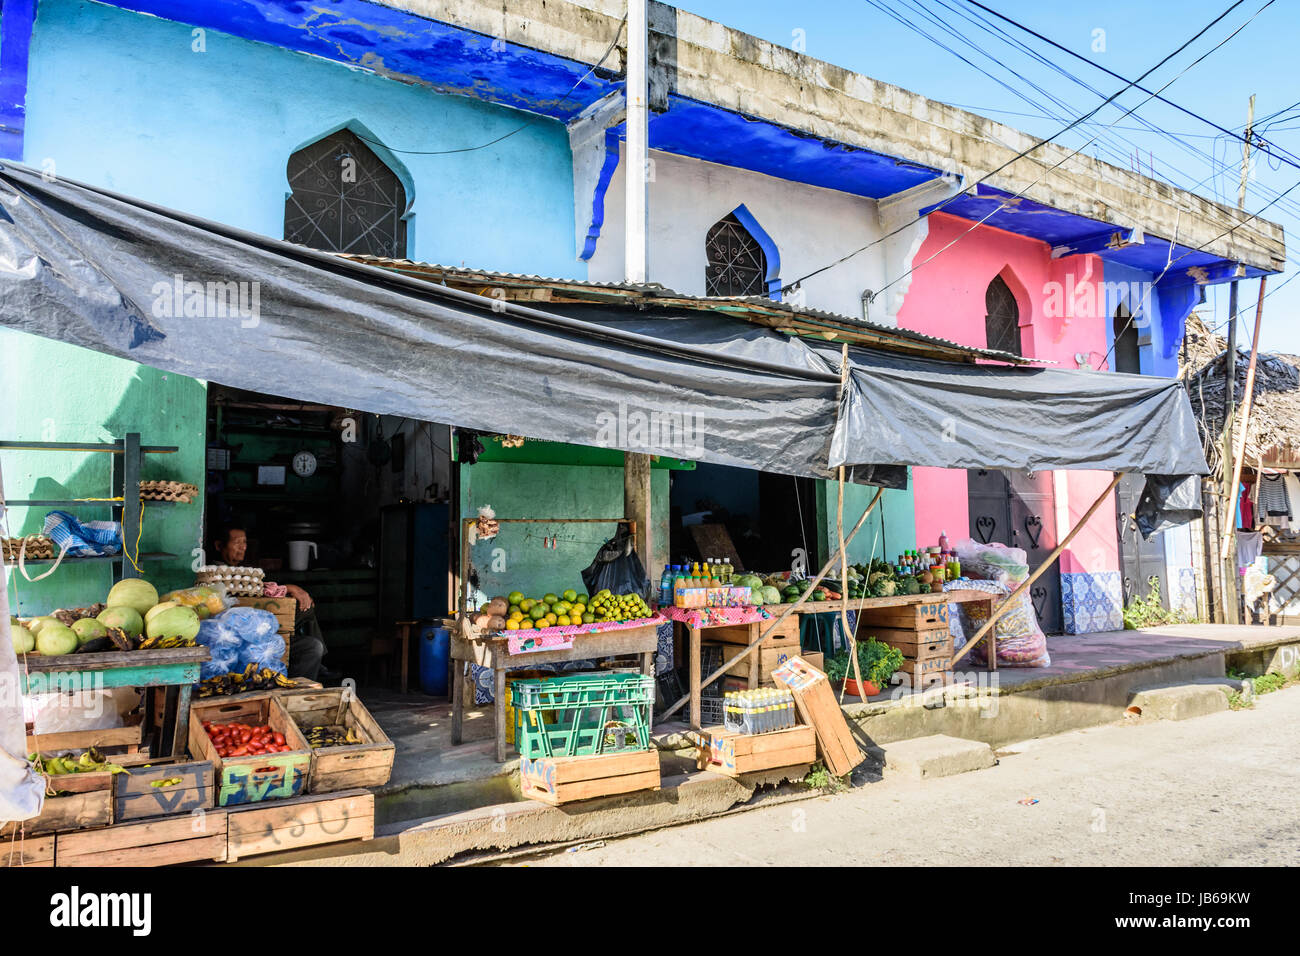 Livingston, Guatemala - August 31, 2016: Shopkeeper sits in doorway of grocery store in Caribbean town of Livingston Stock Photo